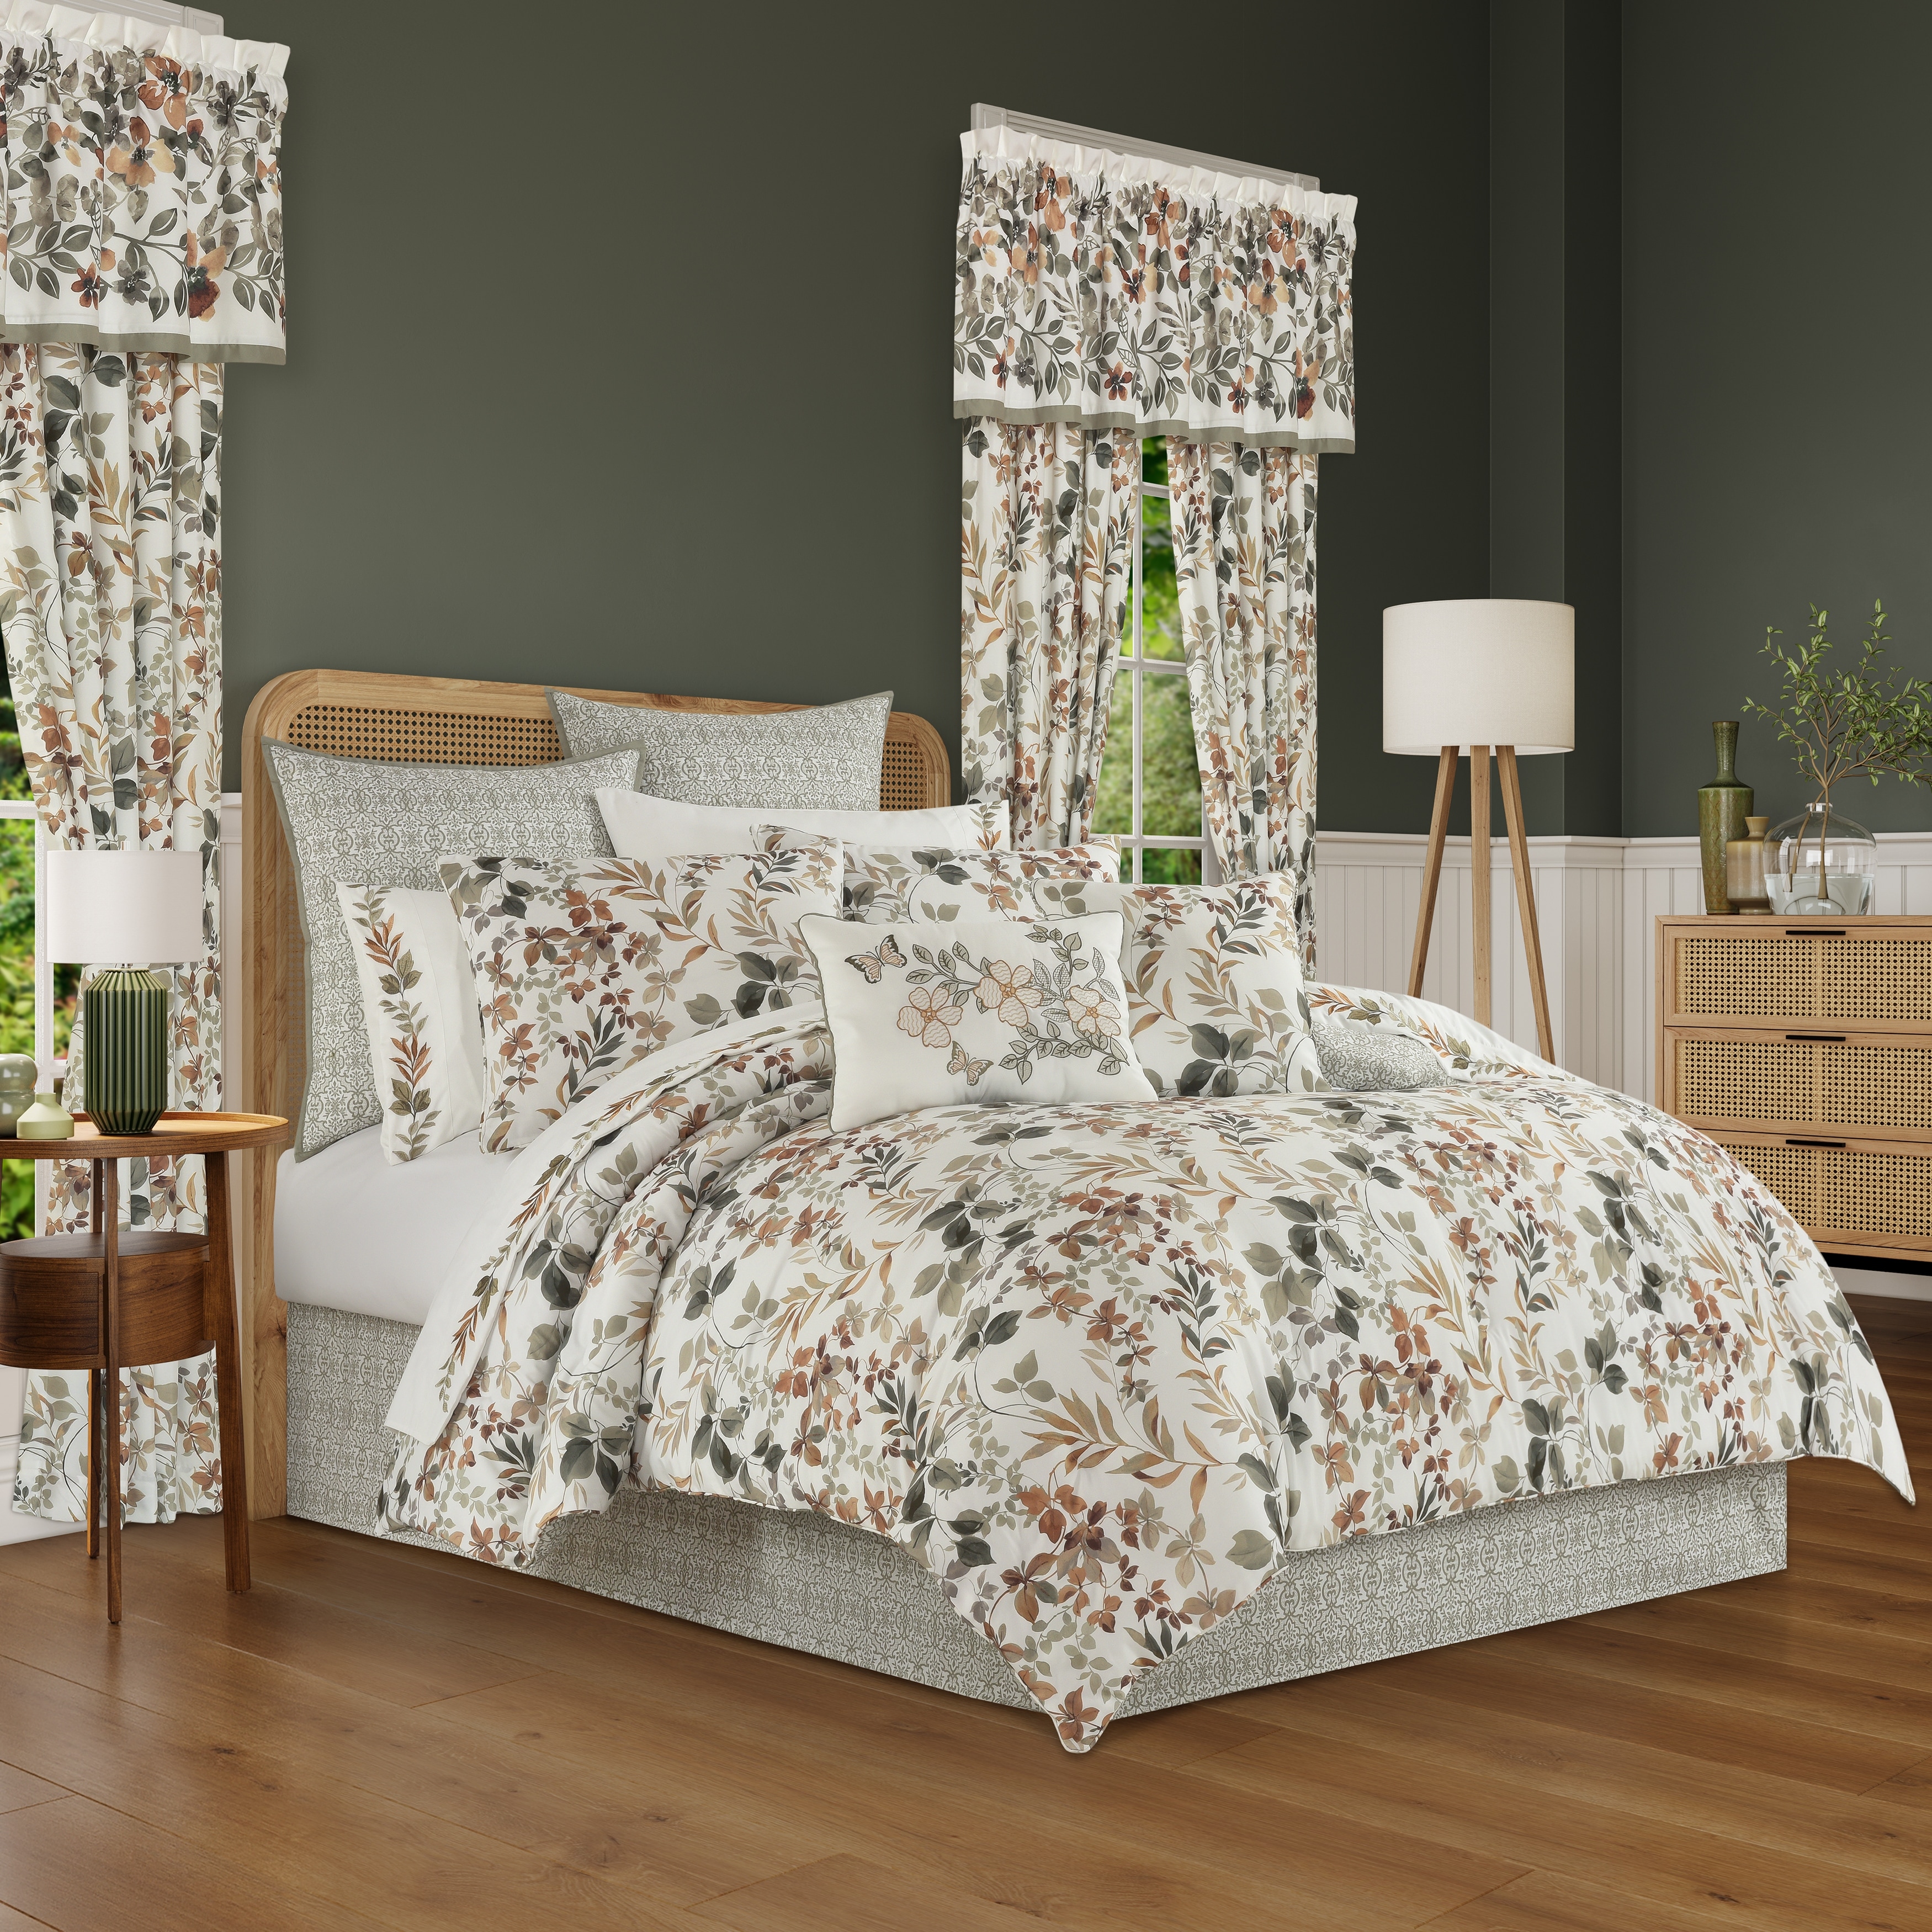 https://ak1.ostkcdn.com/images/products/is/images/direct/93e6fbb5272e05cc897c09fe3b1cc22a0c2406f1/Royal-Court-Evergreen-Comforter-Set.jpg